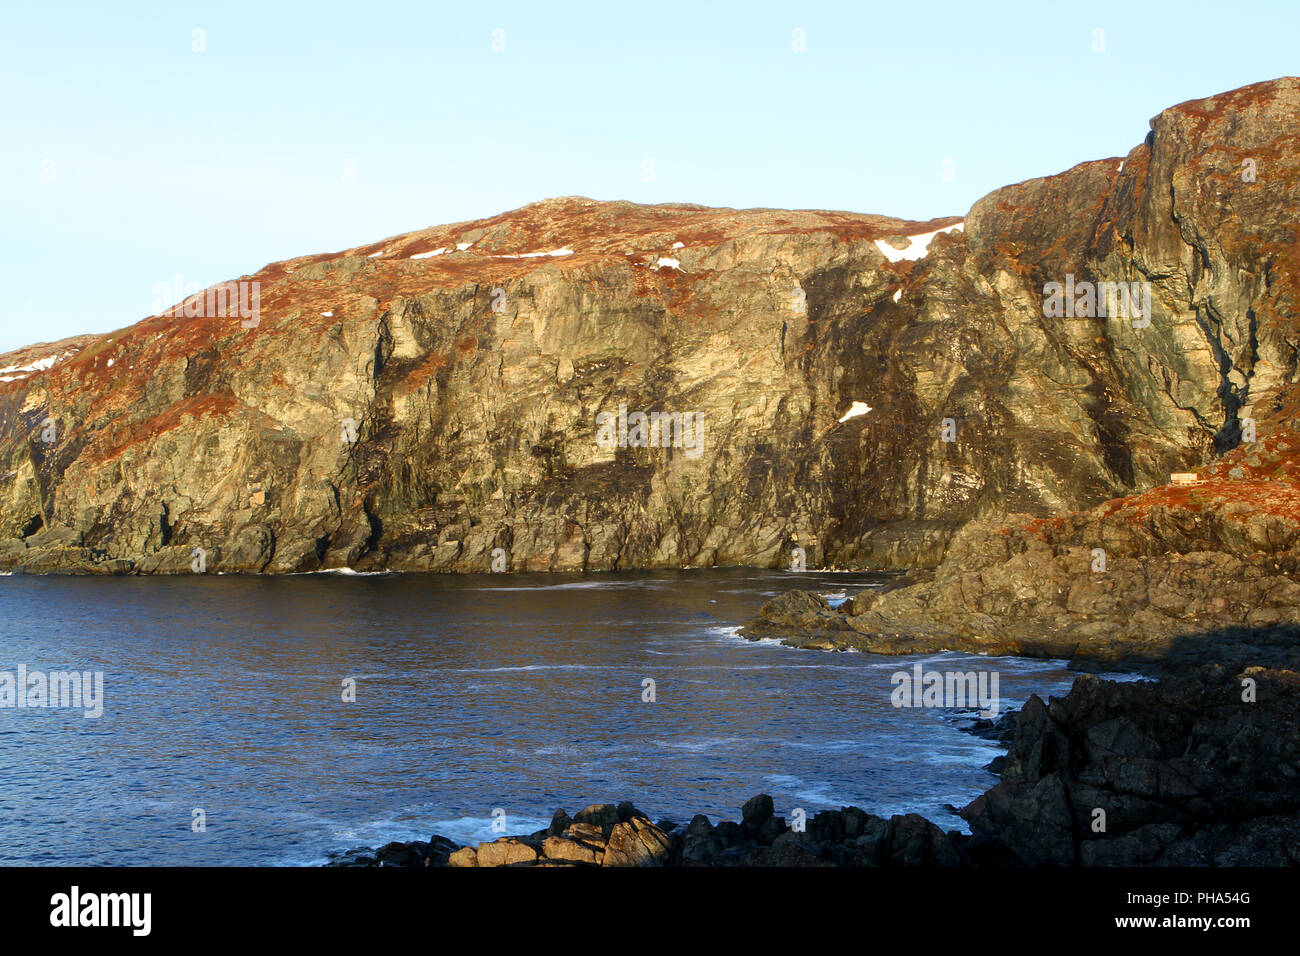 Scenics in community of South Brook which is located near the most northerly point of the #1 Trans-Canada Highway in Newfoundland. Stock Photo